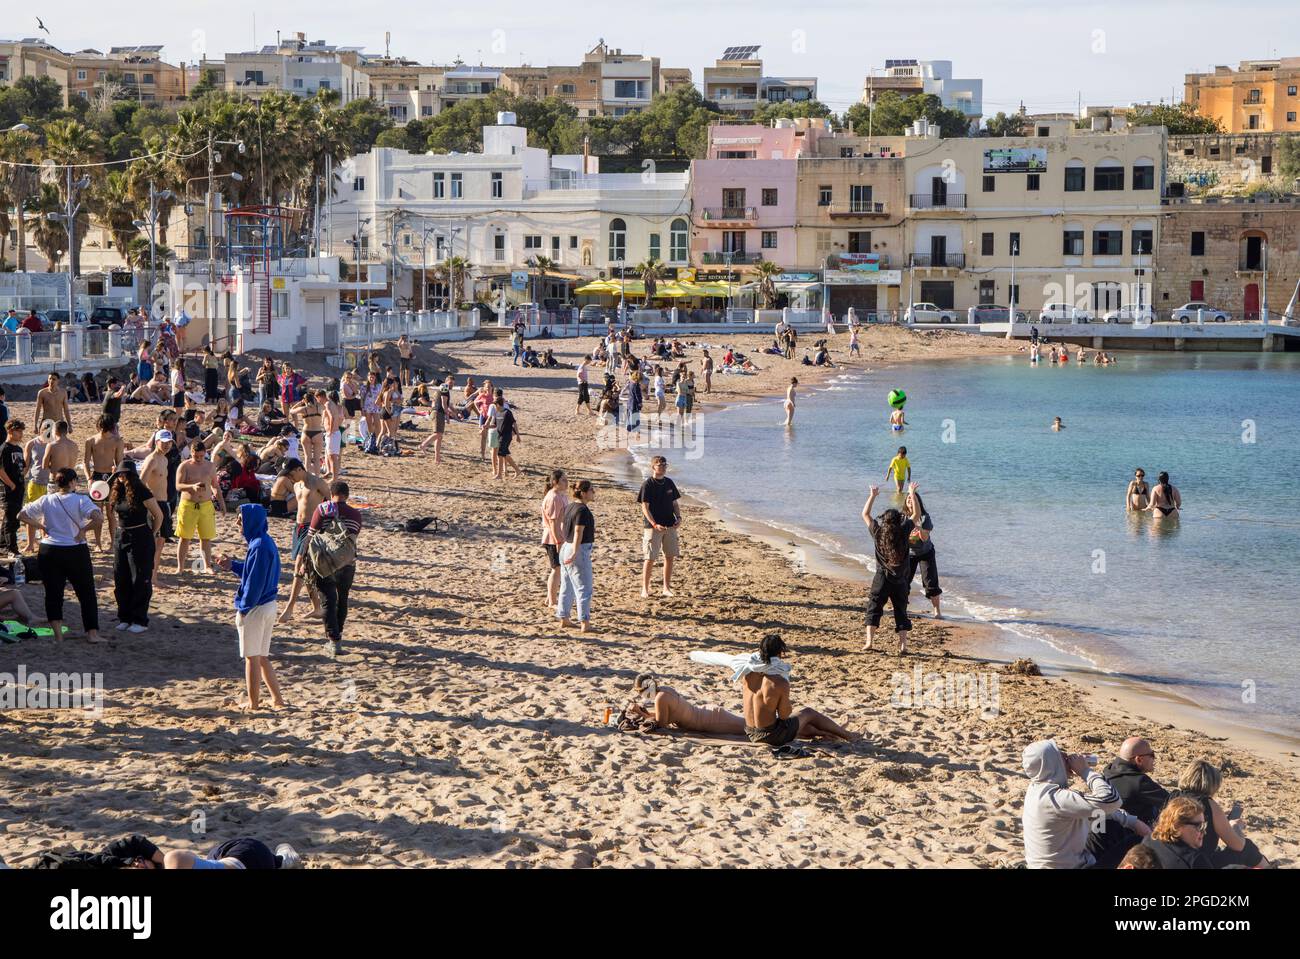 the sandy beach in st georges bay in st julians malta Stock Photo